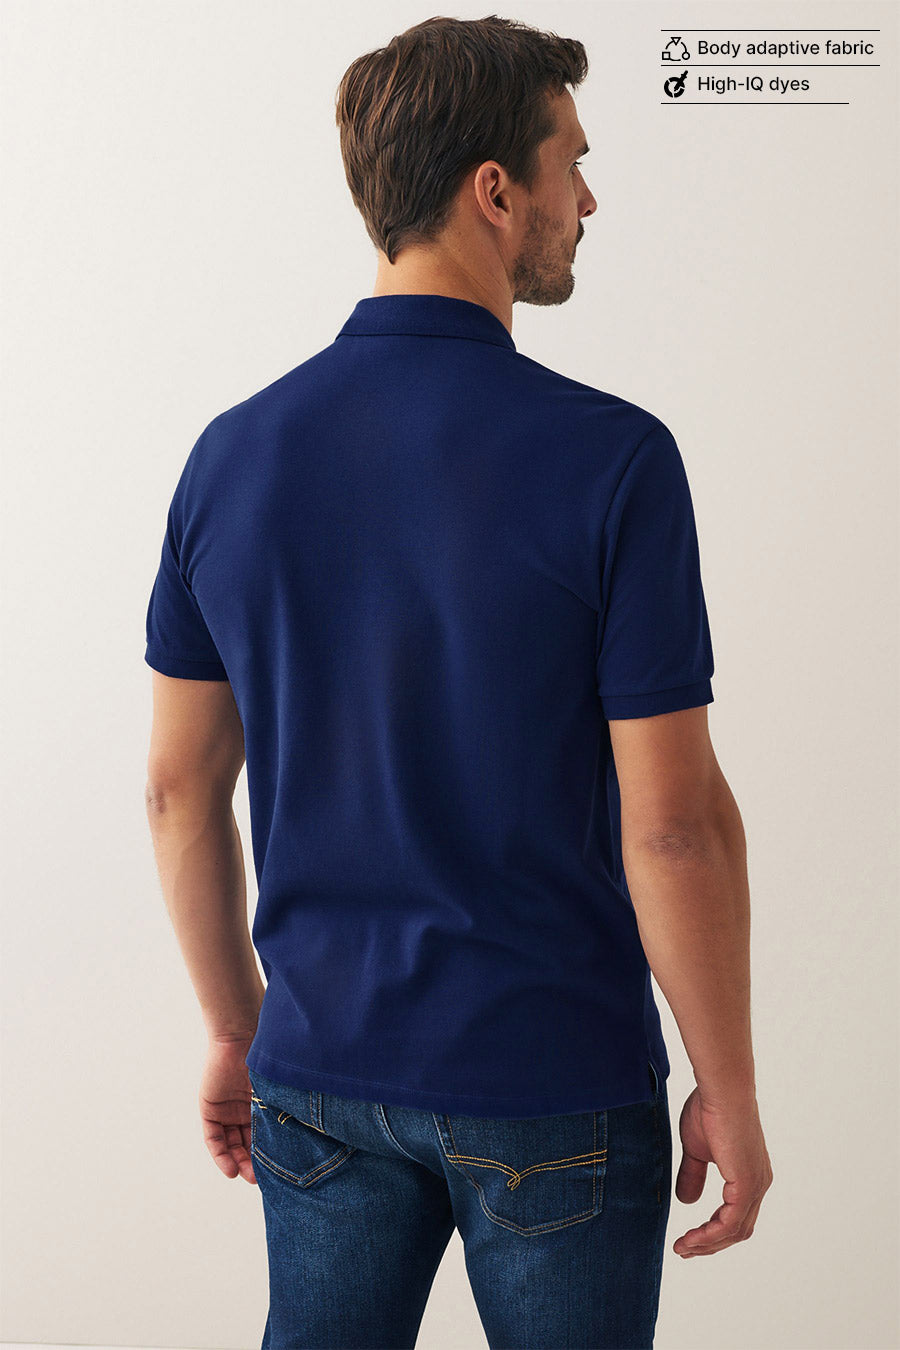 Classic Polo in Royal Blue